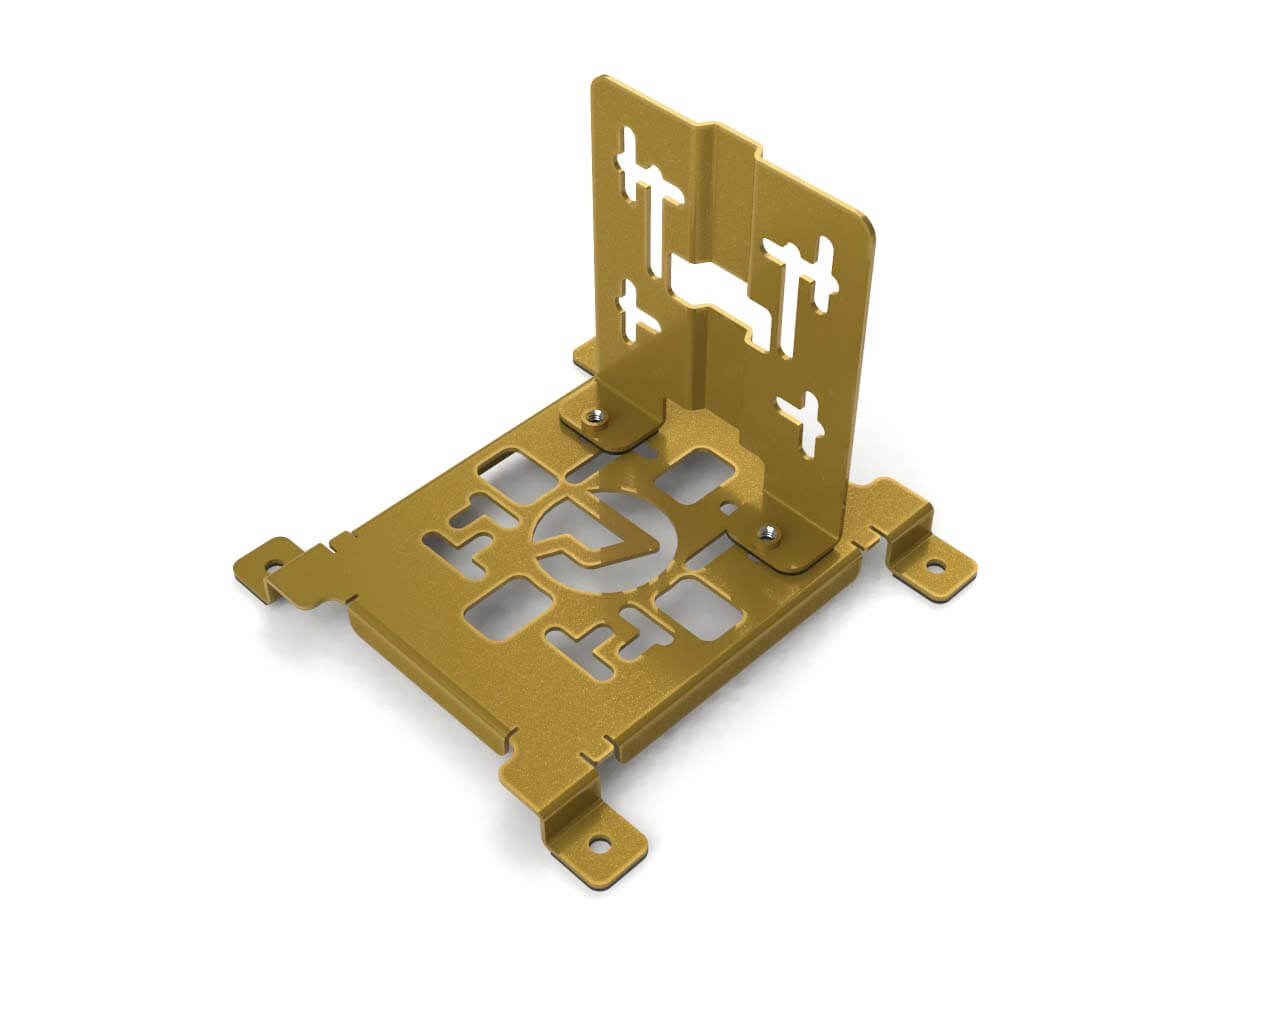 PrimoChill SX Universal Spider Mount Bracket Kit - 120mm Series - PrimoChill - KEEPING IT COOL Gold